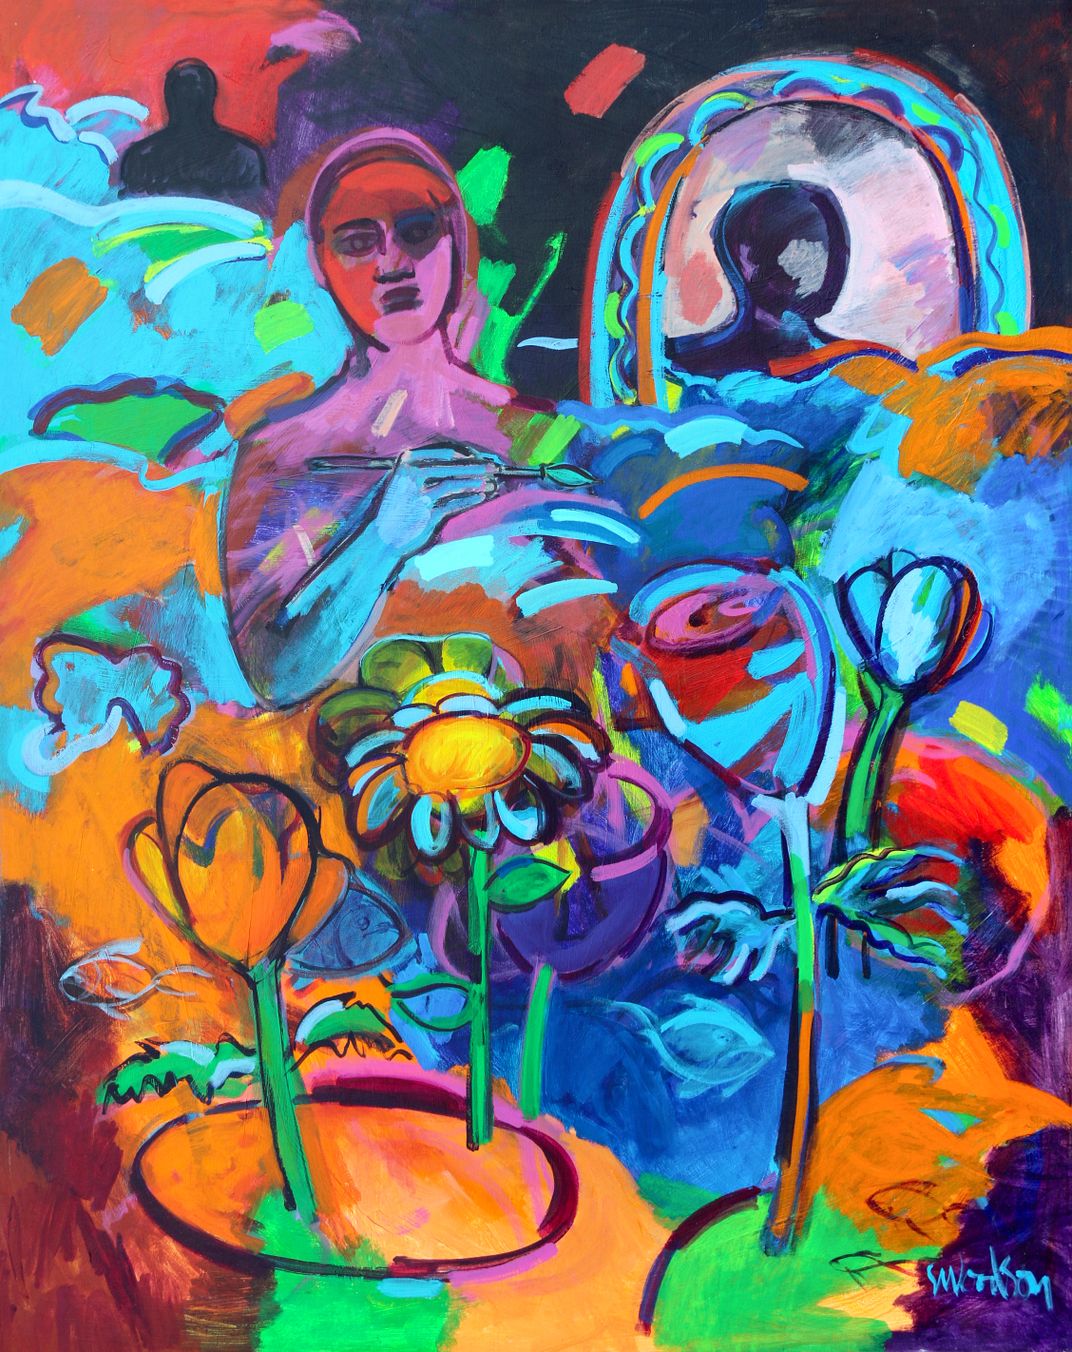 A vibrant colorful scene of oranges, reds, blues and greens with one figure in front and a faceless figure behind and a garden of abstract flowers